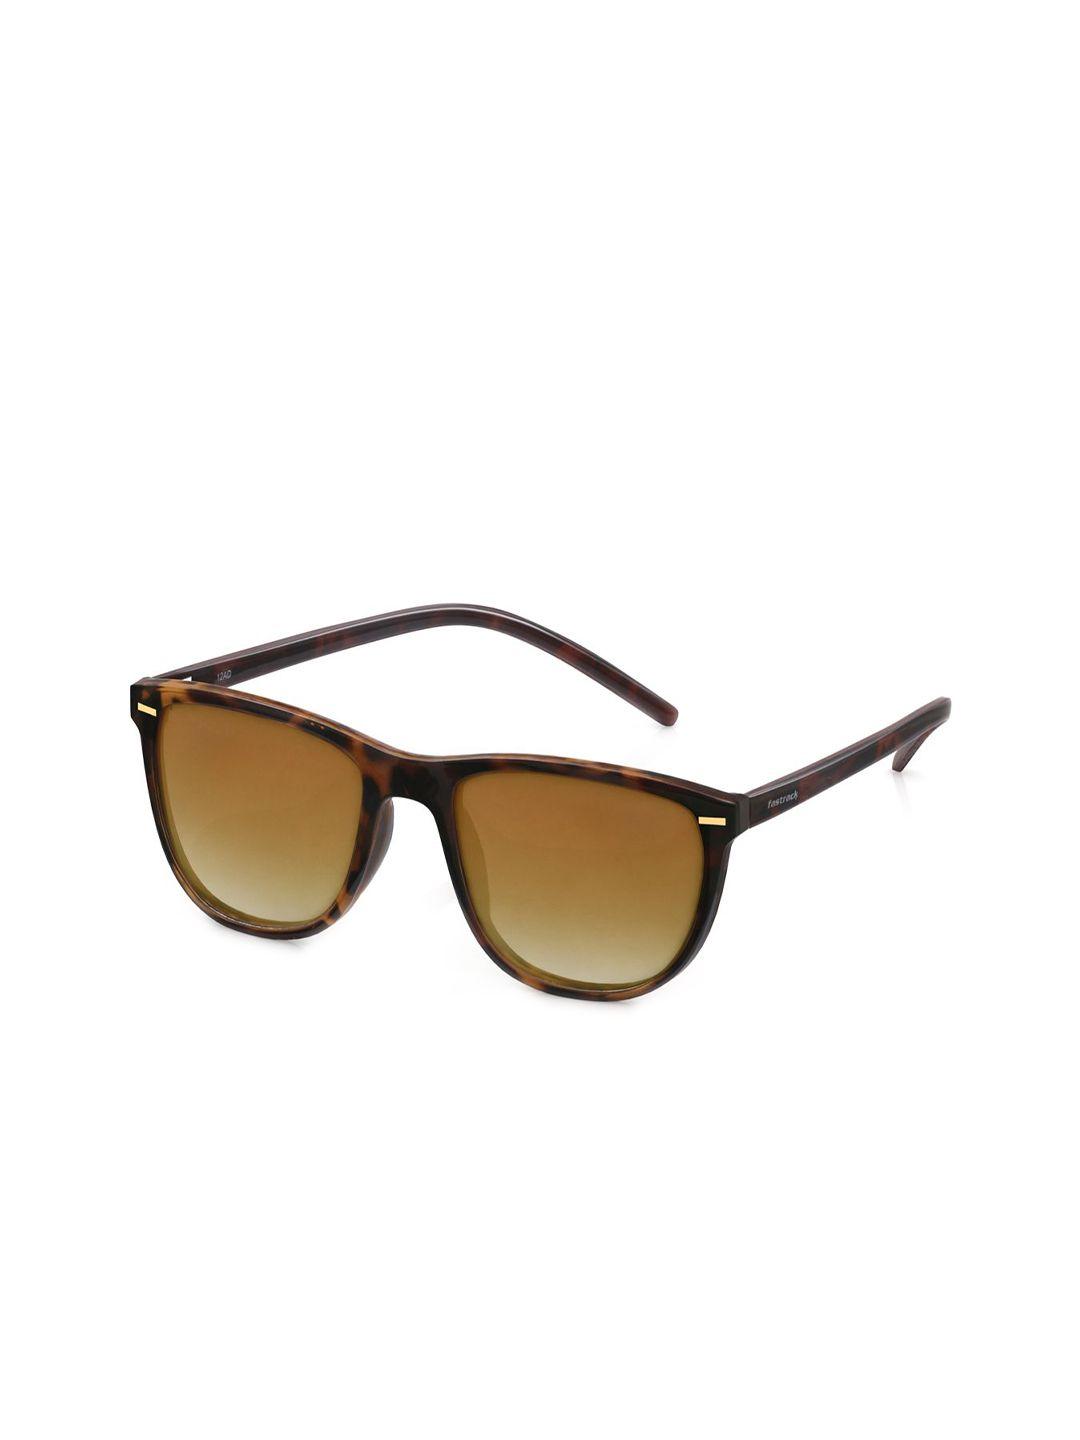 fastrack-unisex-brown-lens-&-brown-square-sunglasses-with-uv-protected-lens-p365br1